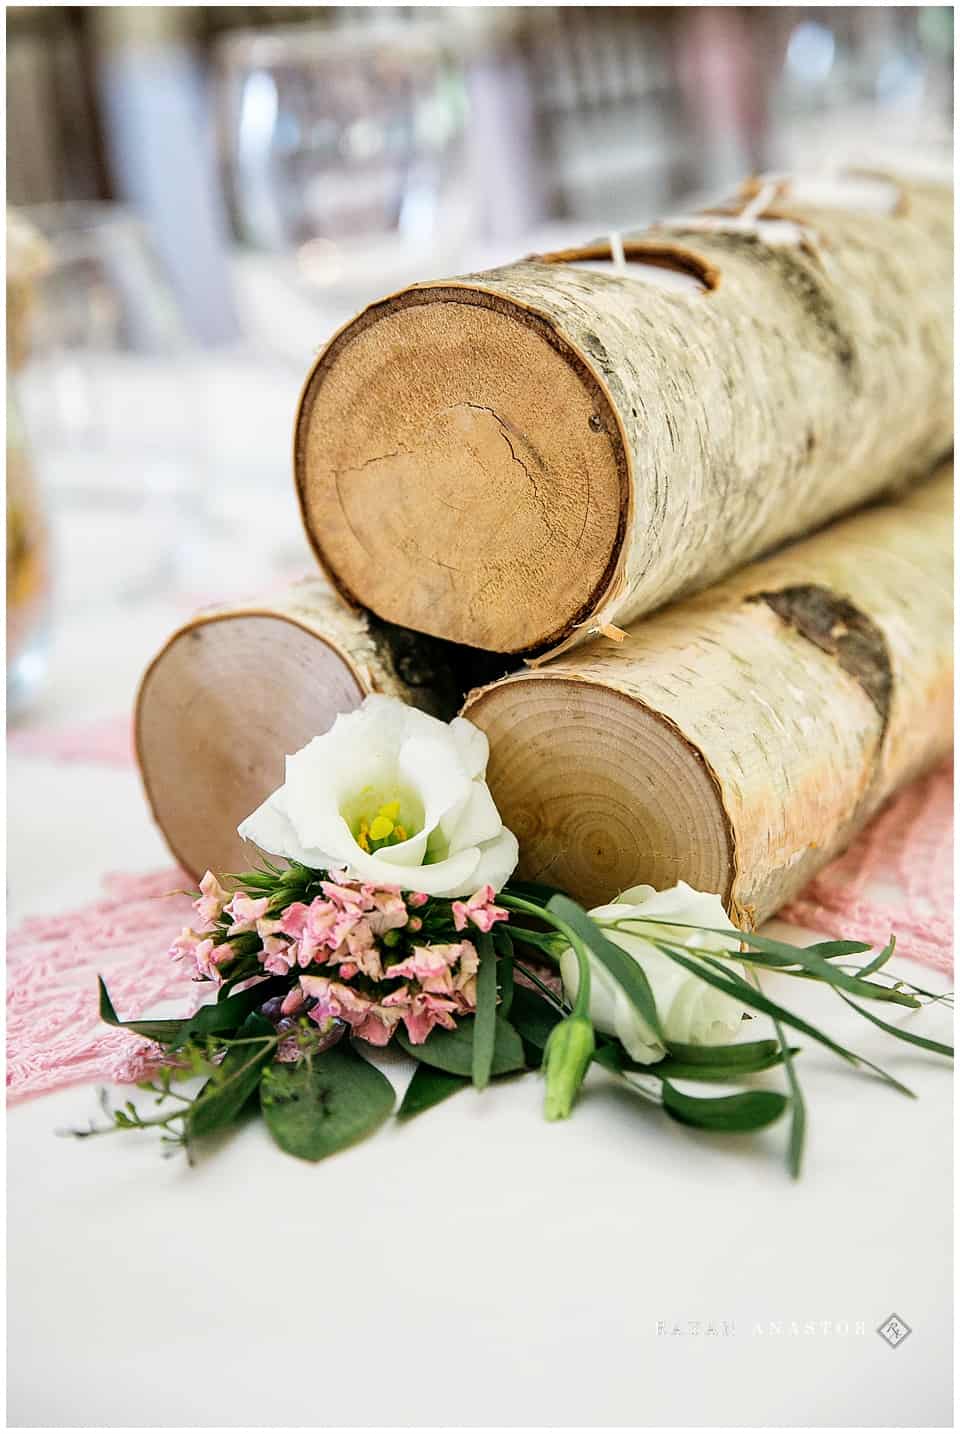 hoopers flower garden wedding decorations with pink accent